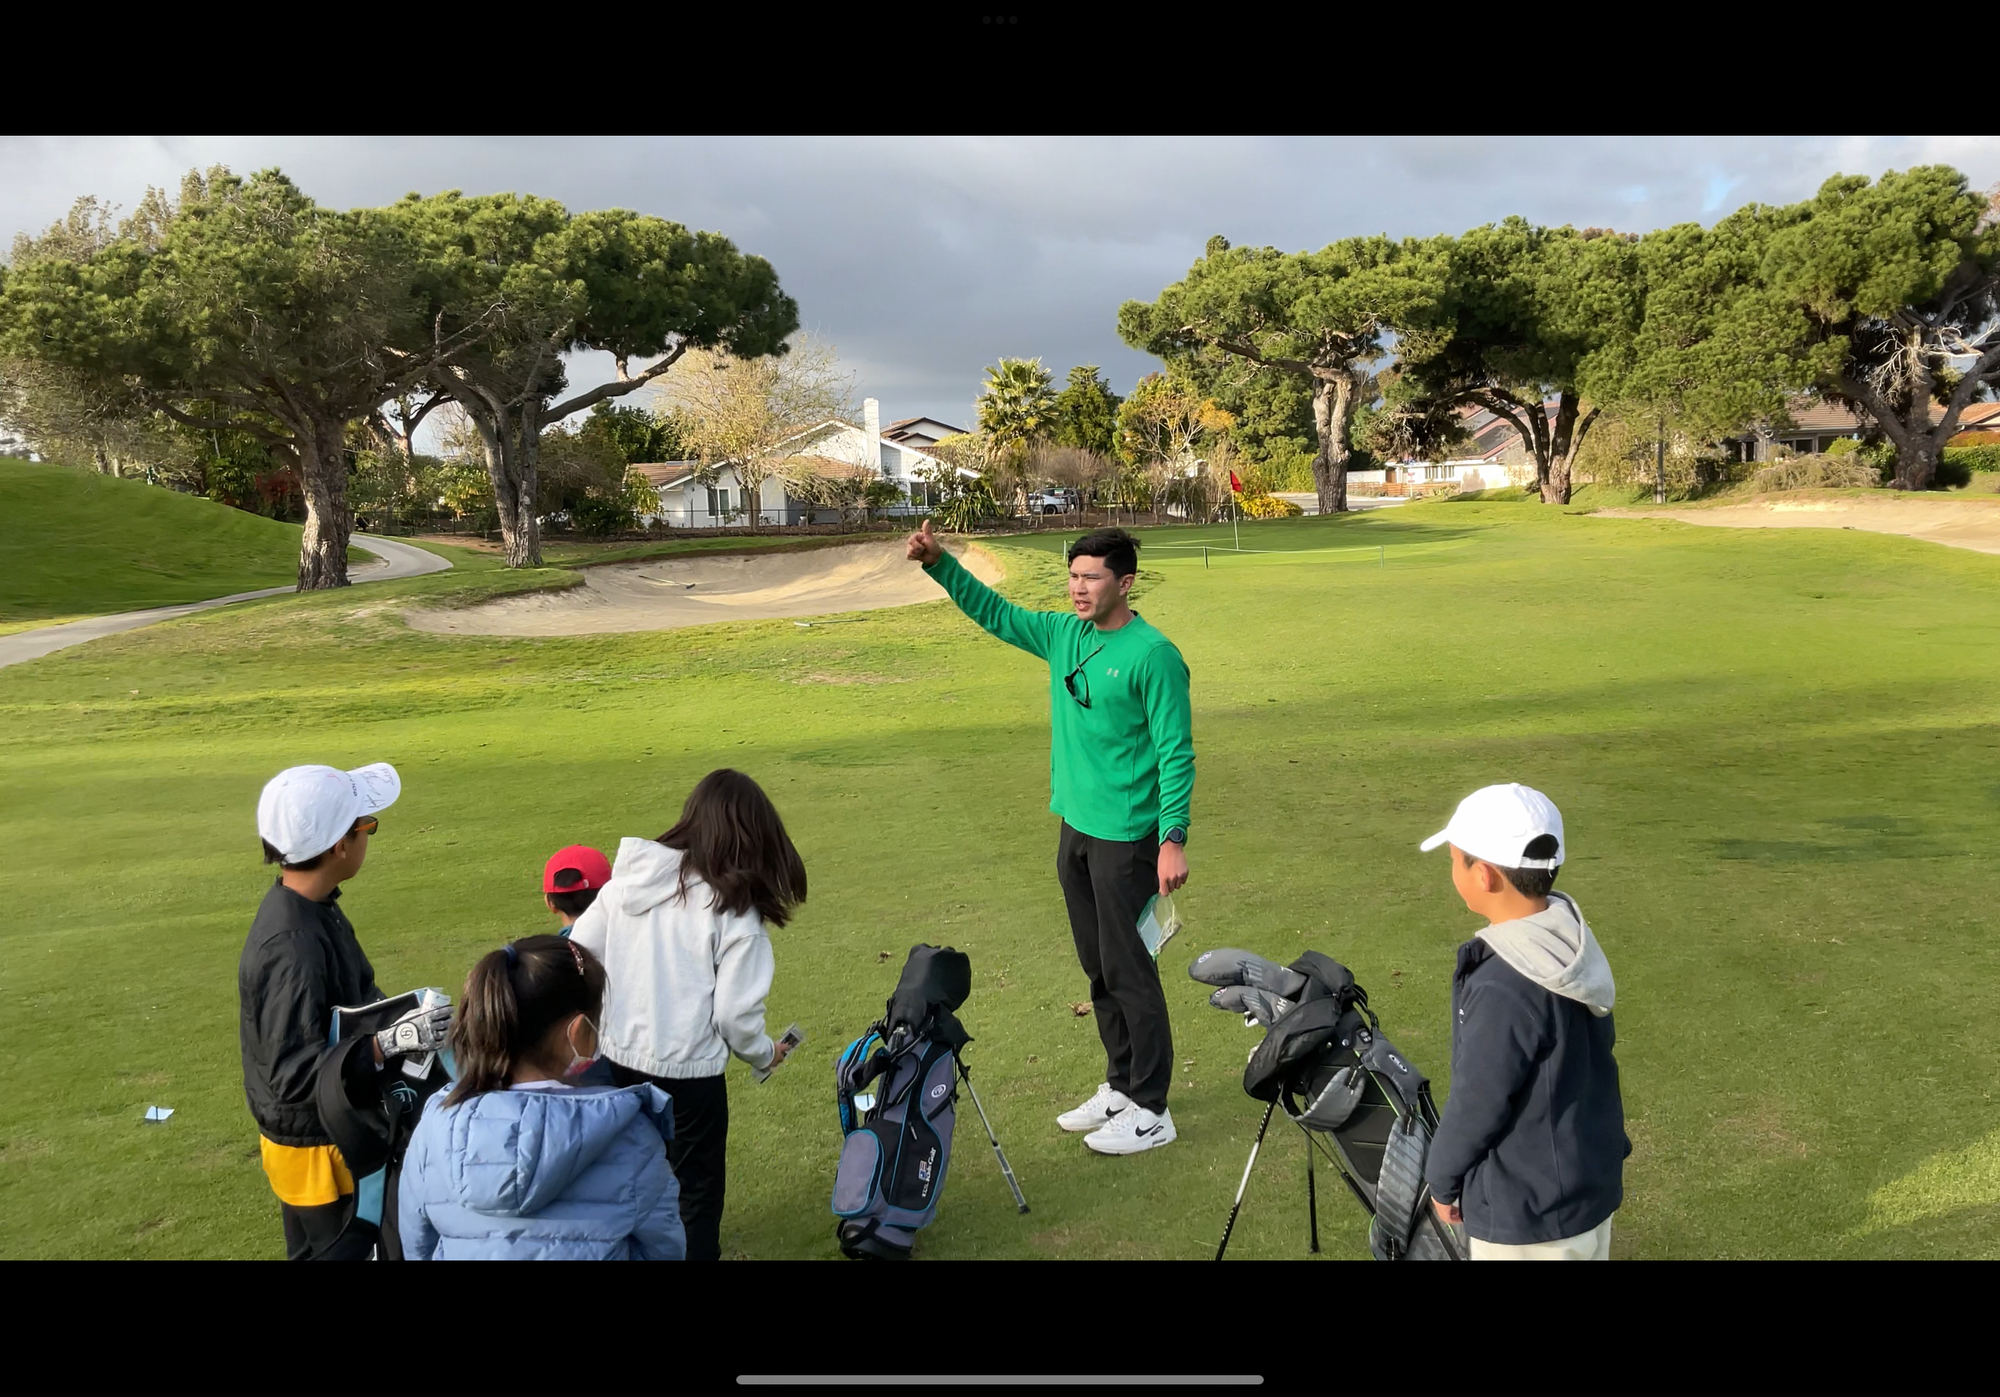 Team Golf Upgrades - Creating A Positive Experience for My Junior Golfers